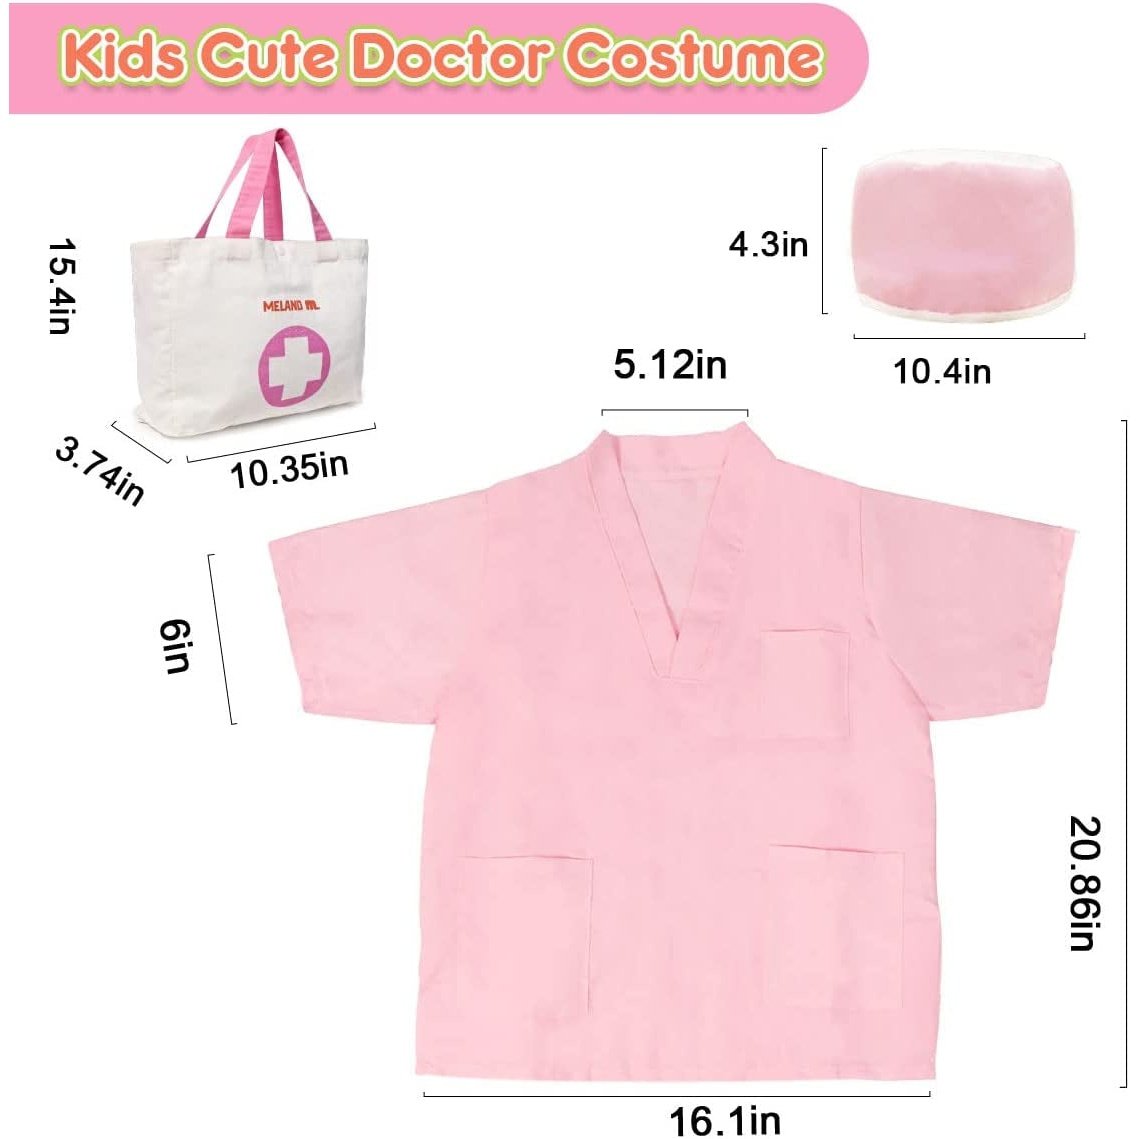 Doctors Set for Kids - Children Pet Vet Care Play Set with Doctor Costume, Plush Dog, Pretend Role Play Medical Kit Toys Gifts for 3 4 5 6 Year Old Toddlers